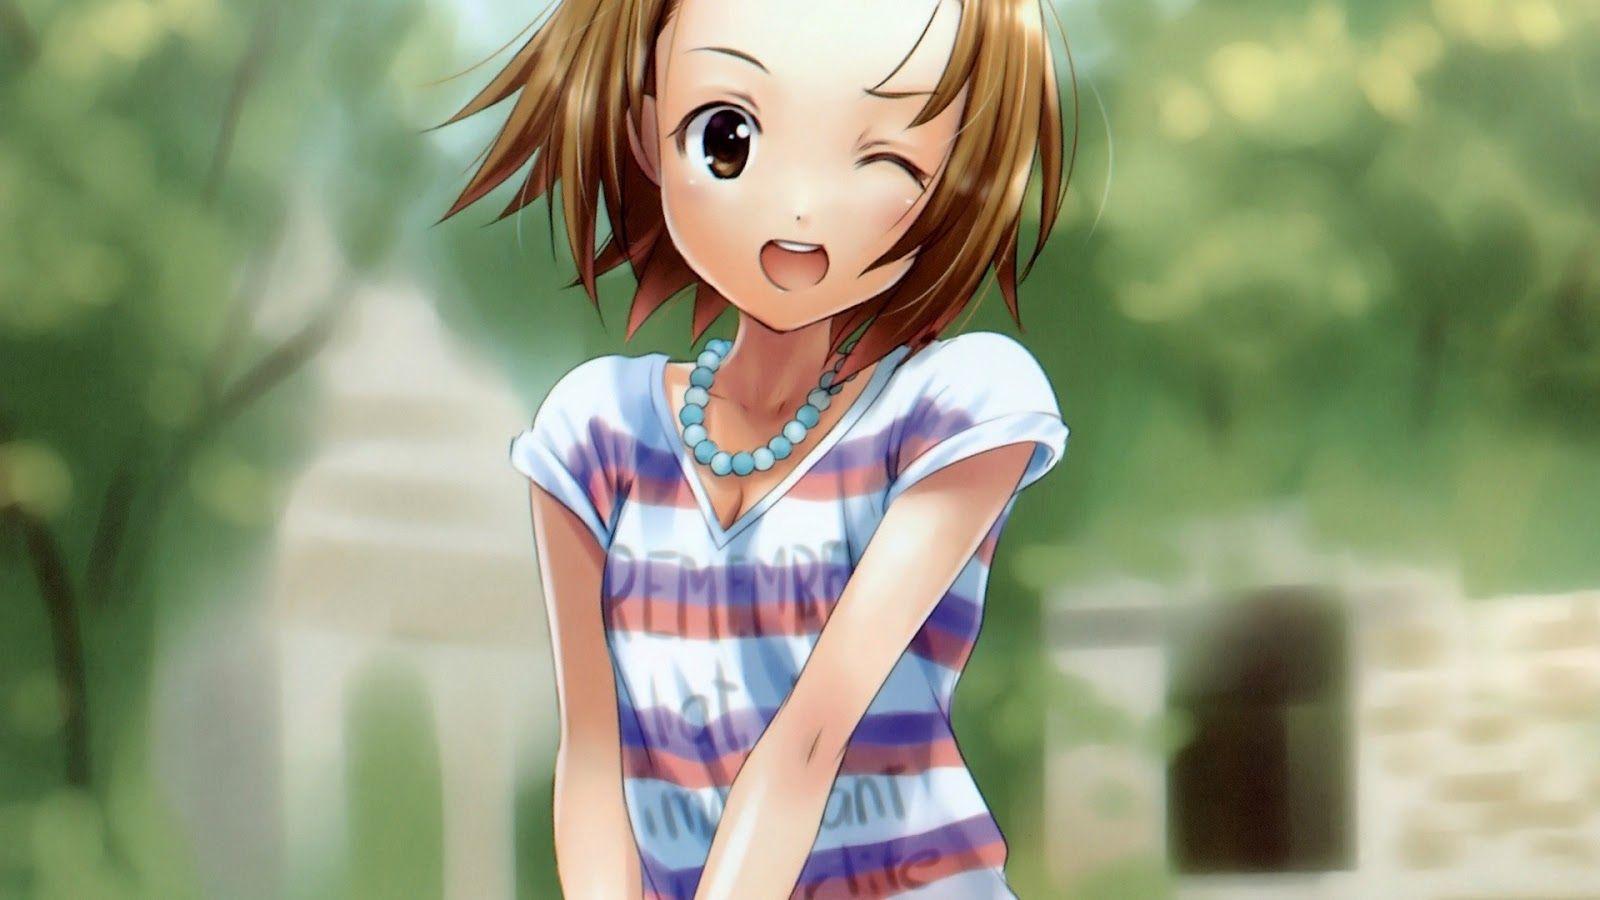 Download HD Cute Anime Wallpaper For Computer. Cute Anime Photo